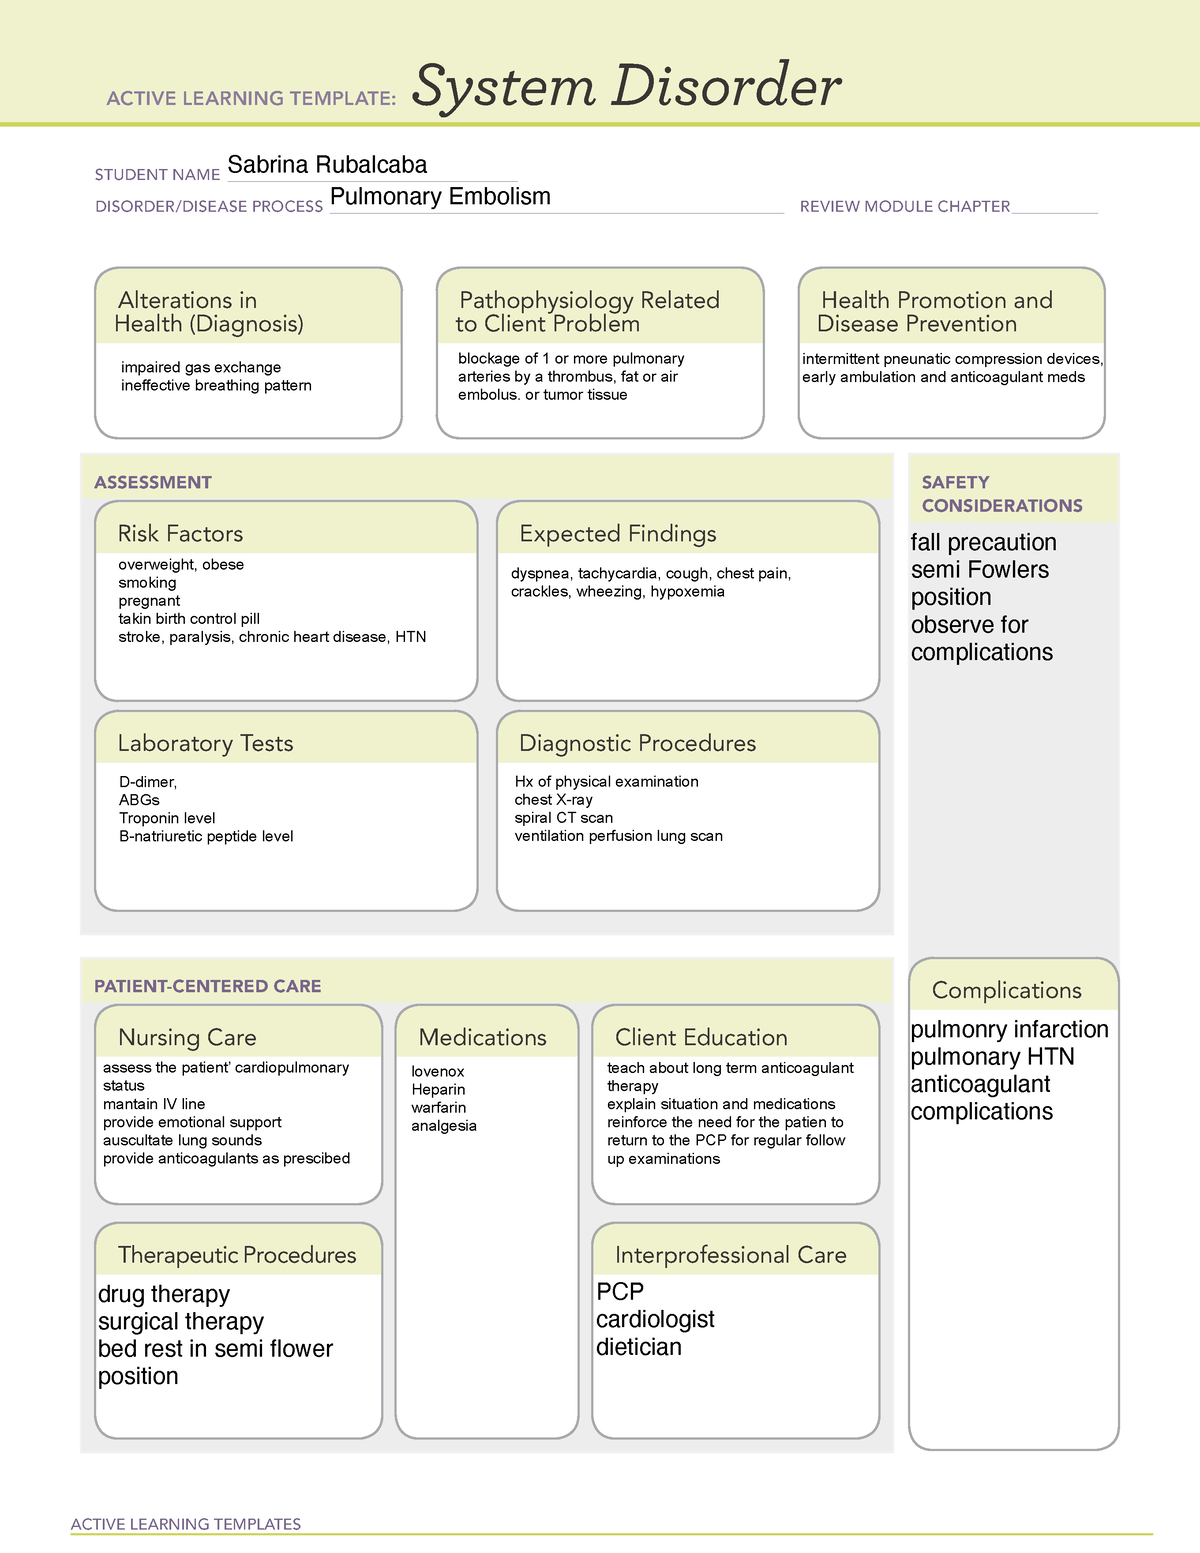 System Disorder template - ACTIVE LEARNING TEMPLATES System Disorder ...